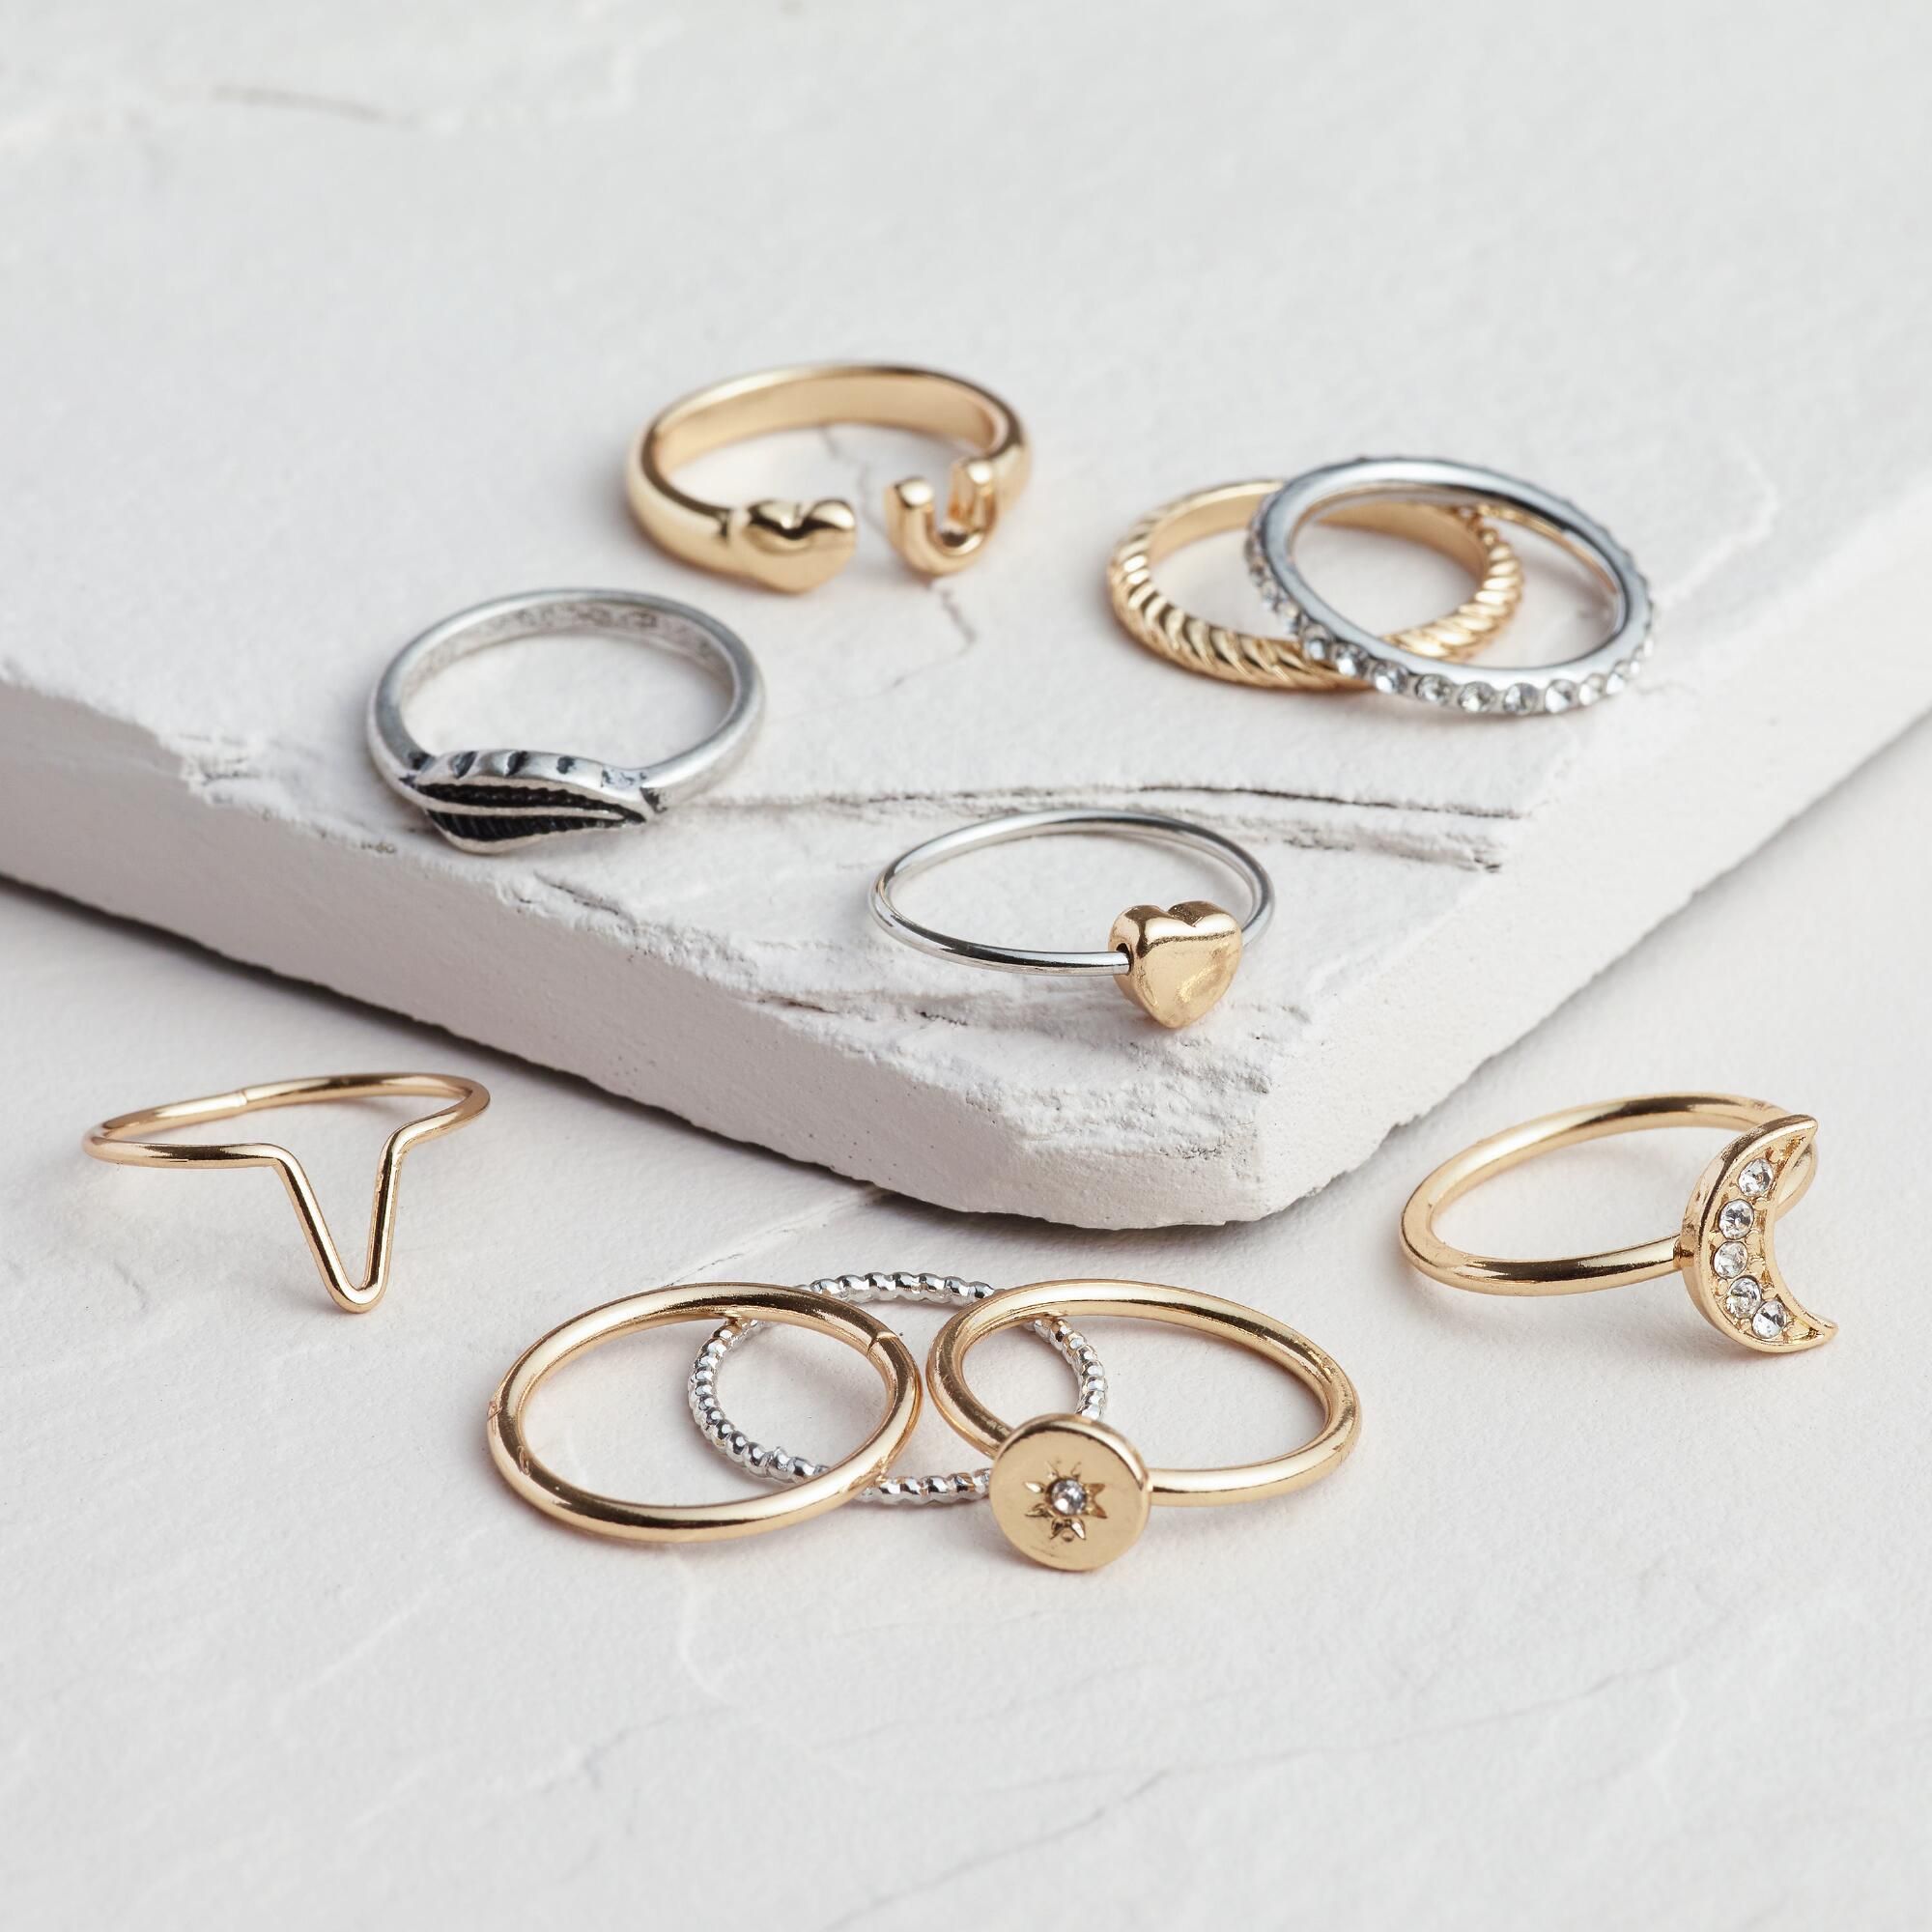 Gold and Silver Midi Rings, Set of 10: Gold/Silver by World Market | World Market